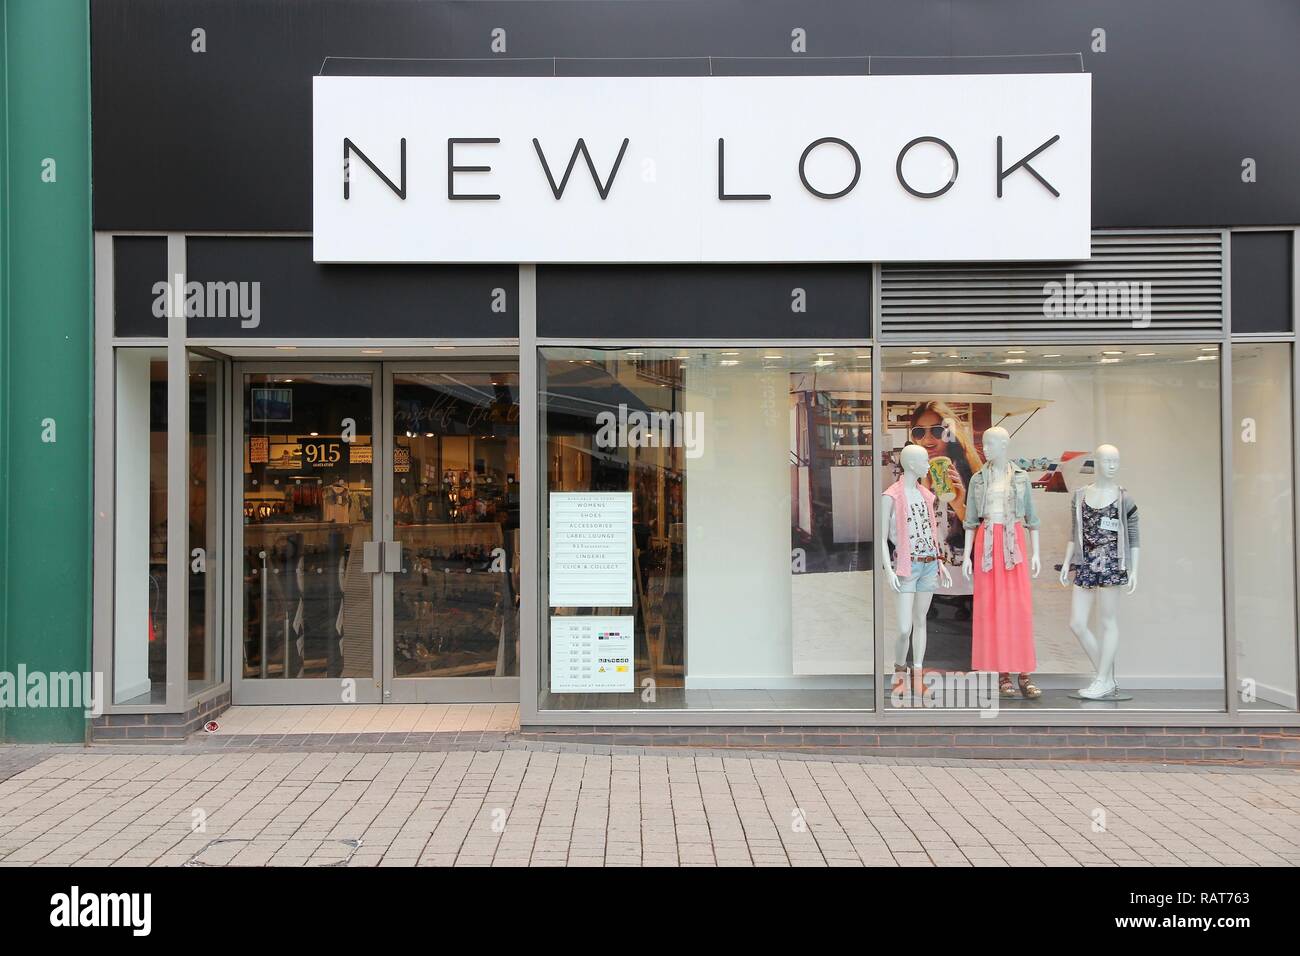 New Look Store Uk High Resolution Stock Photography and Images - Alamy